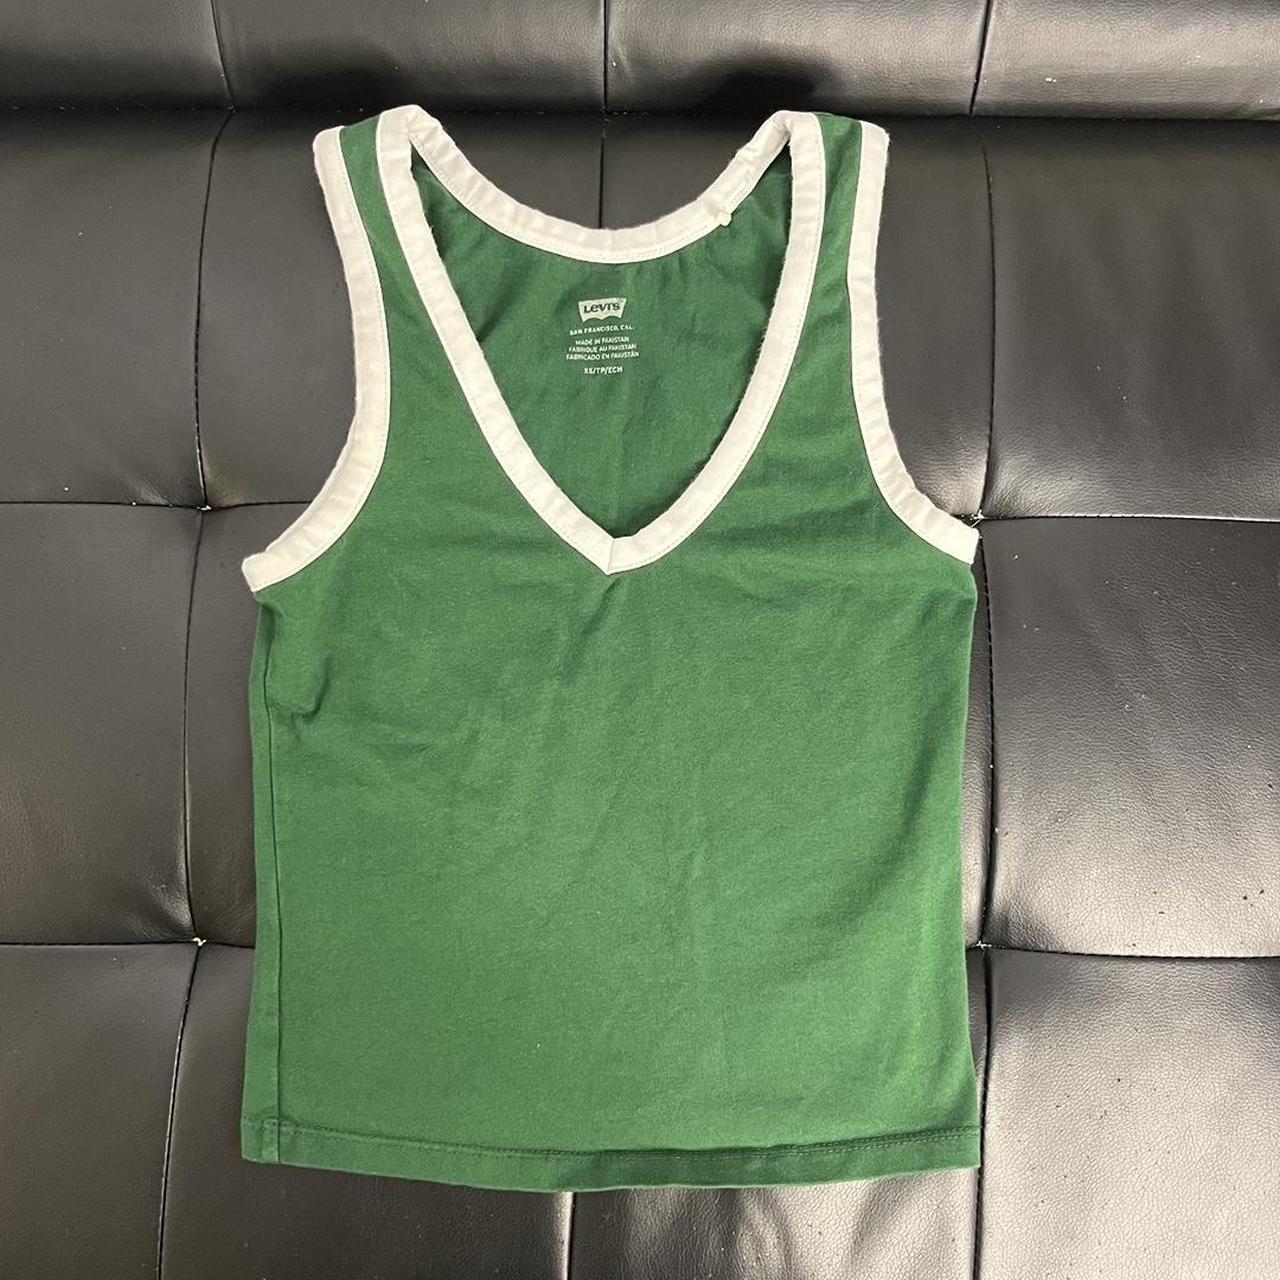 levi’s green and white trim tank top like new, size... - Depop